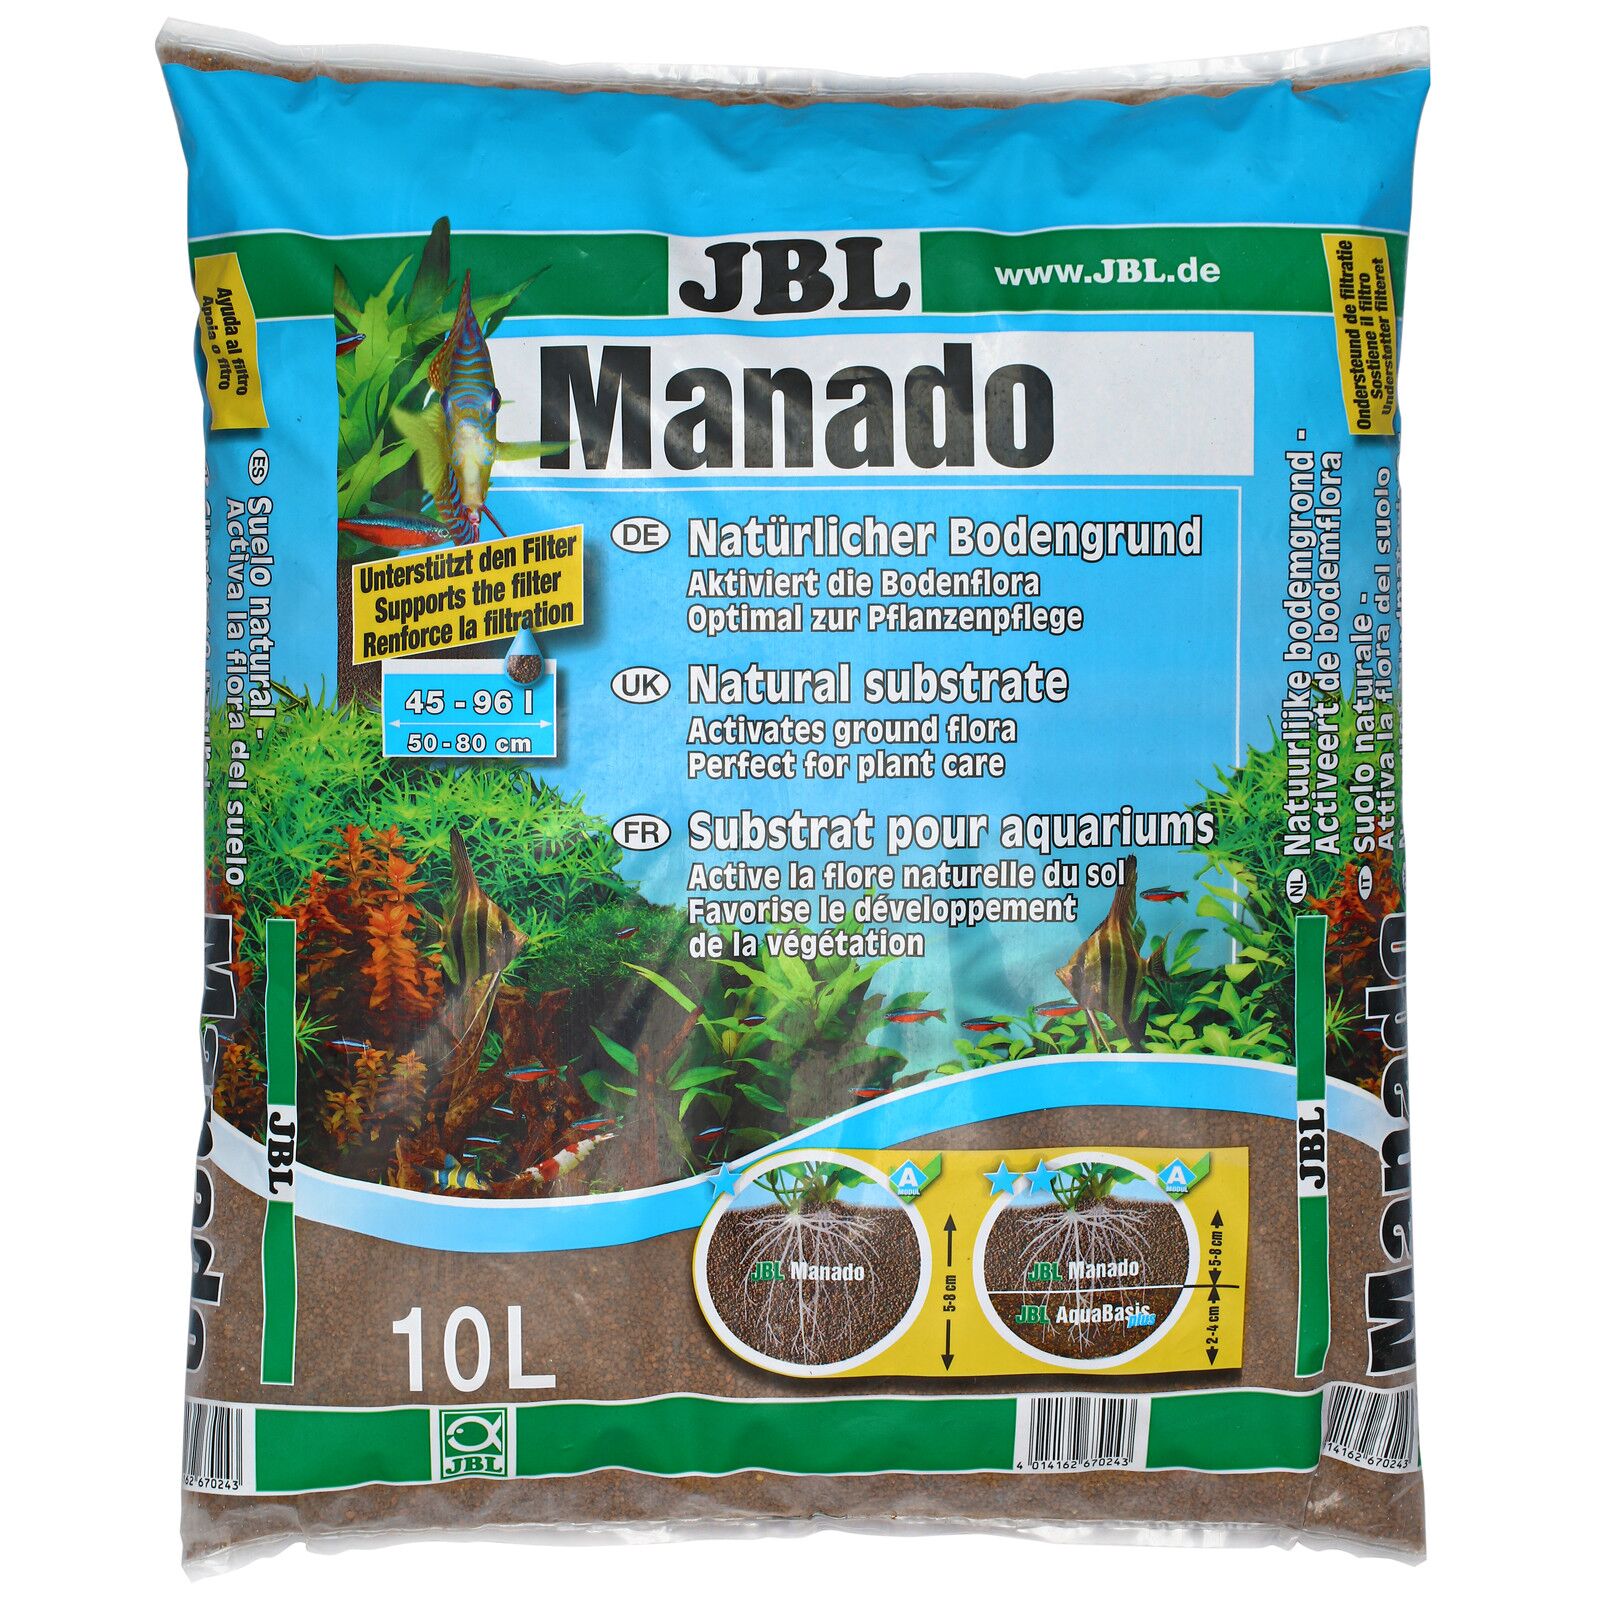 JBL Manado Substrate for the Fund Pack of 3 Liters Aquarium Line